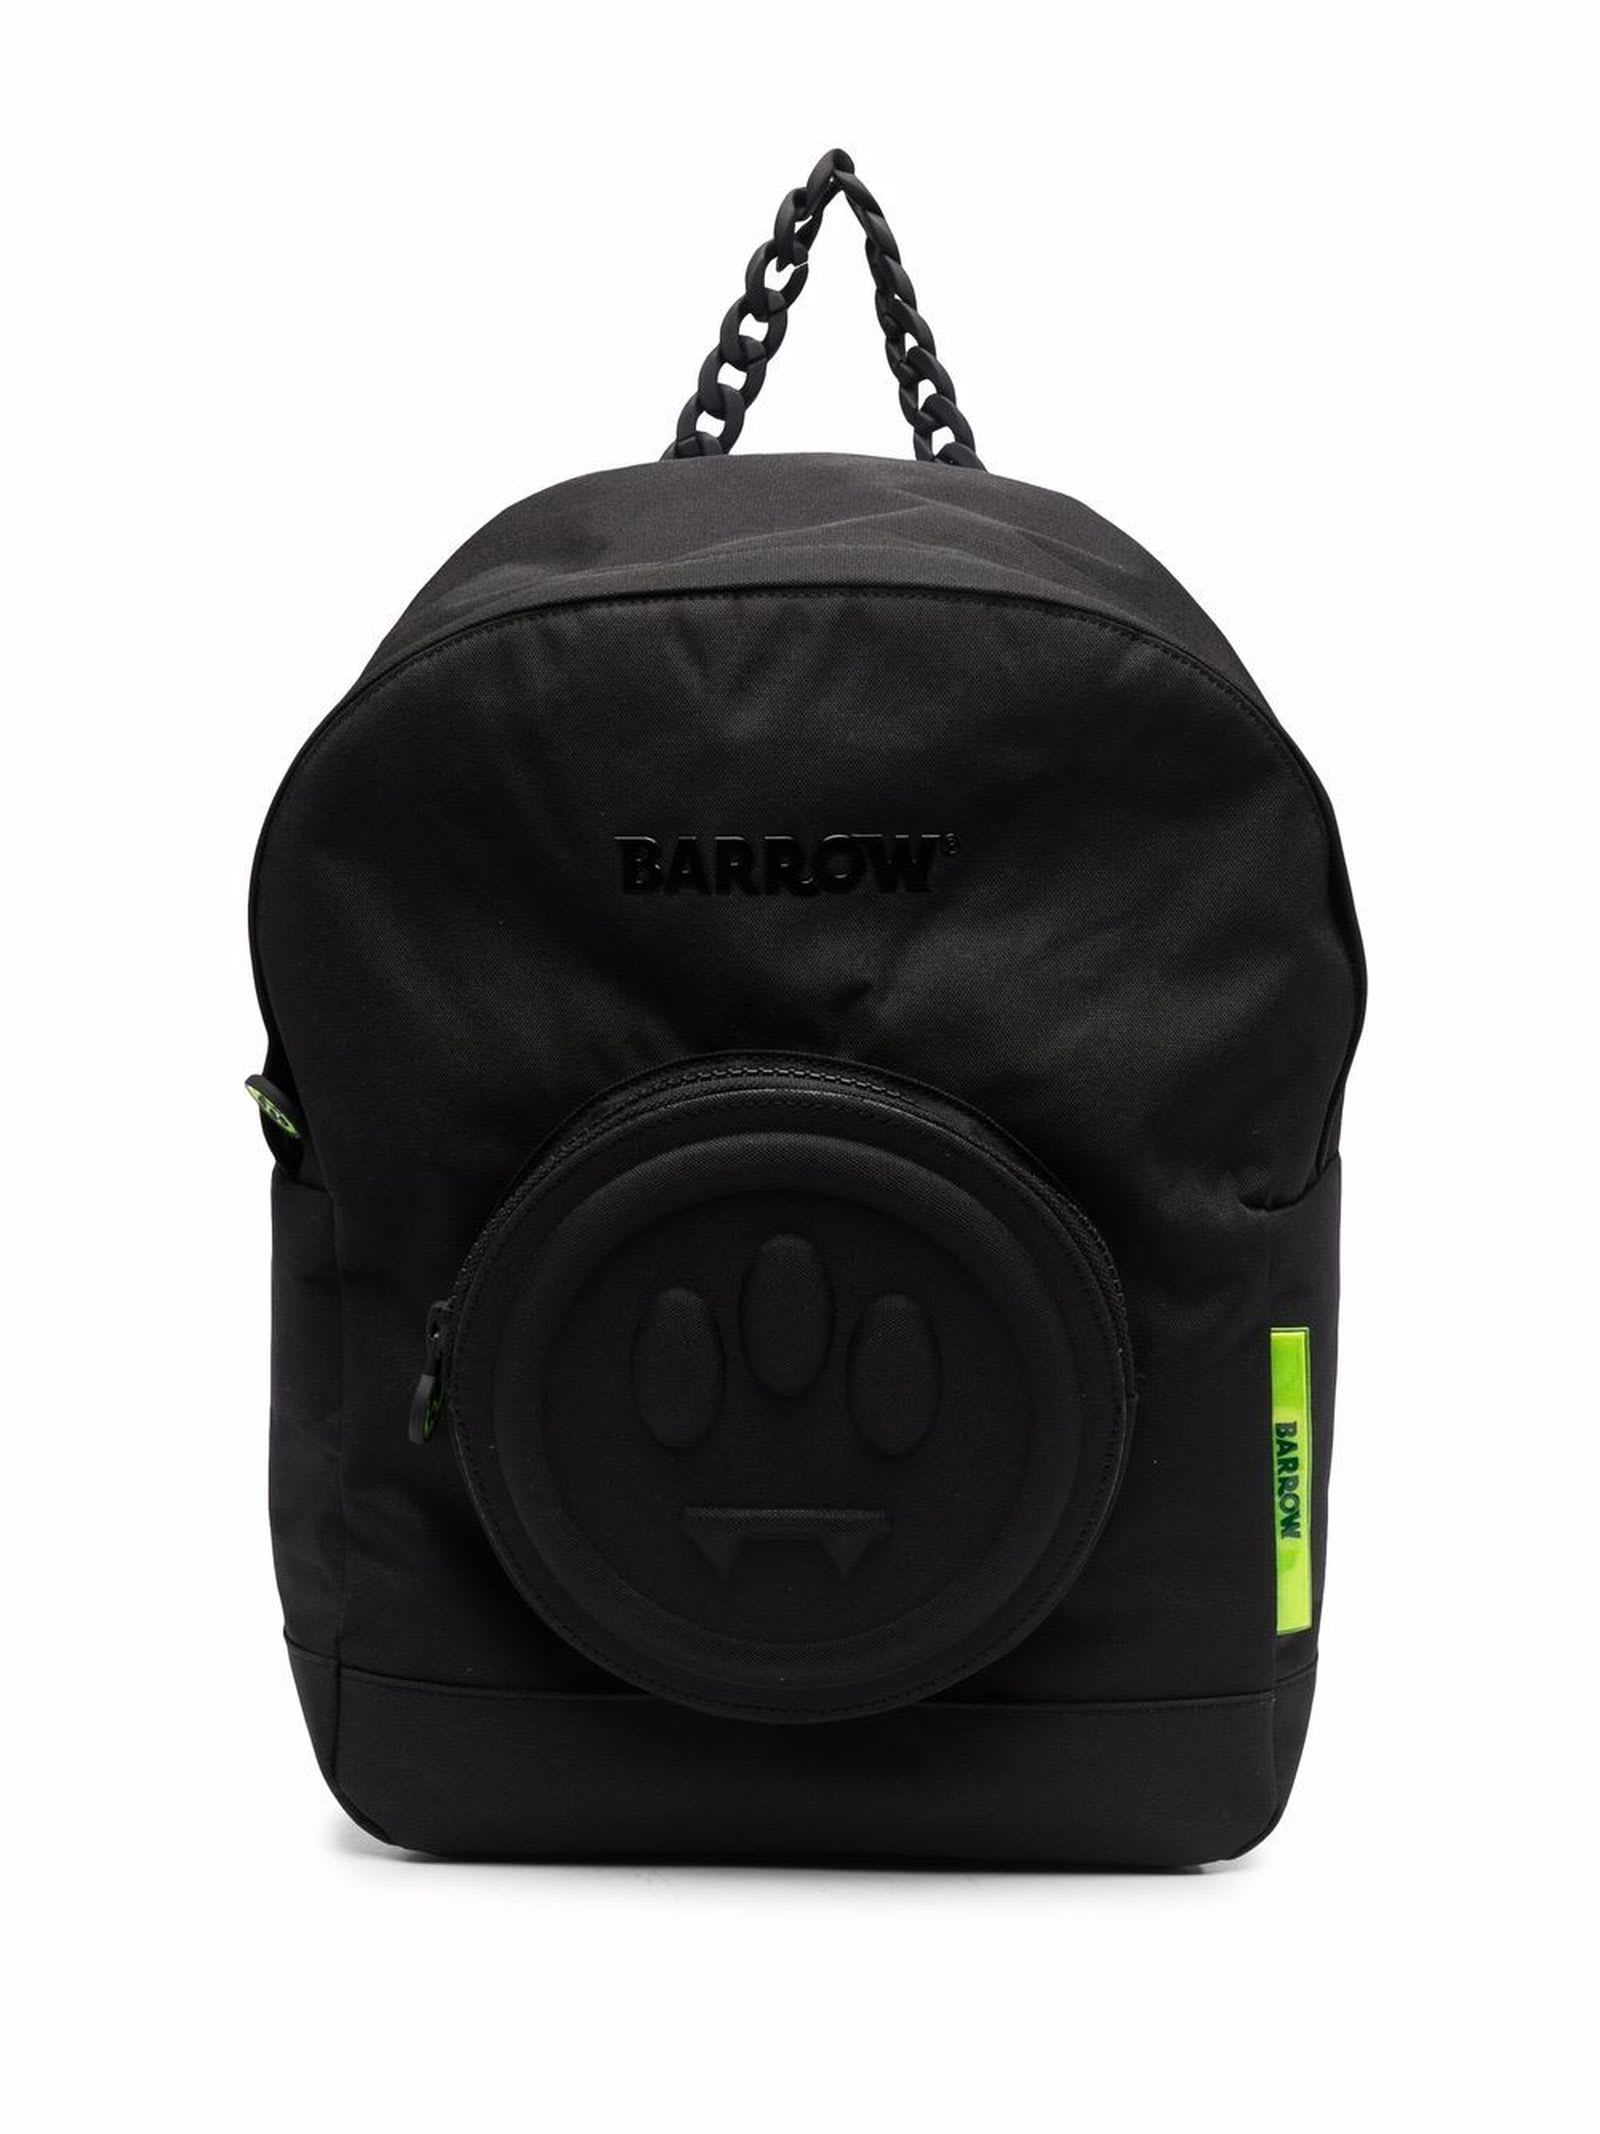 Barrow Black And Yellow Backpack